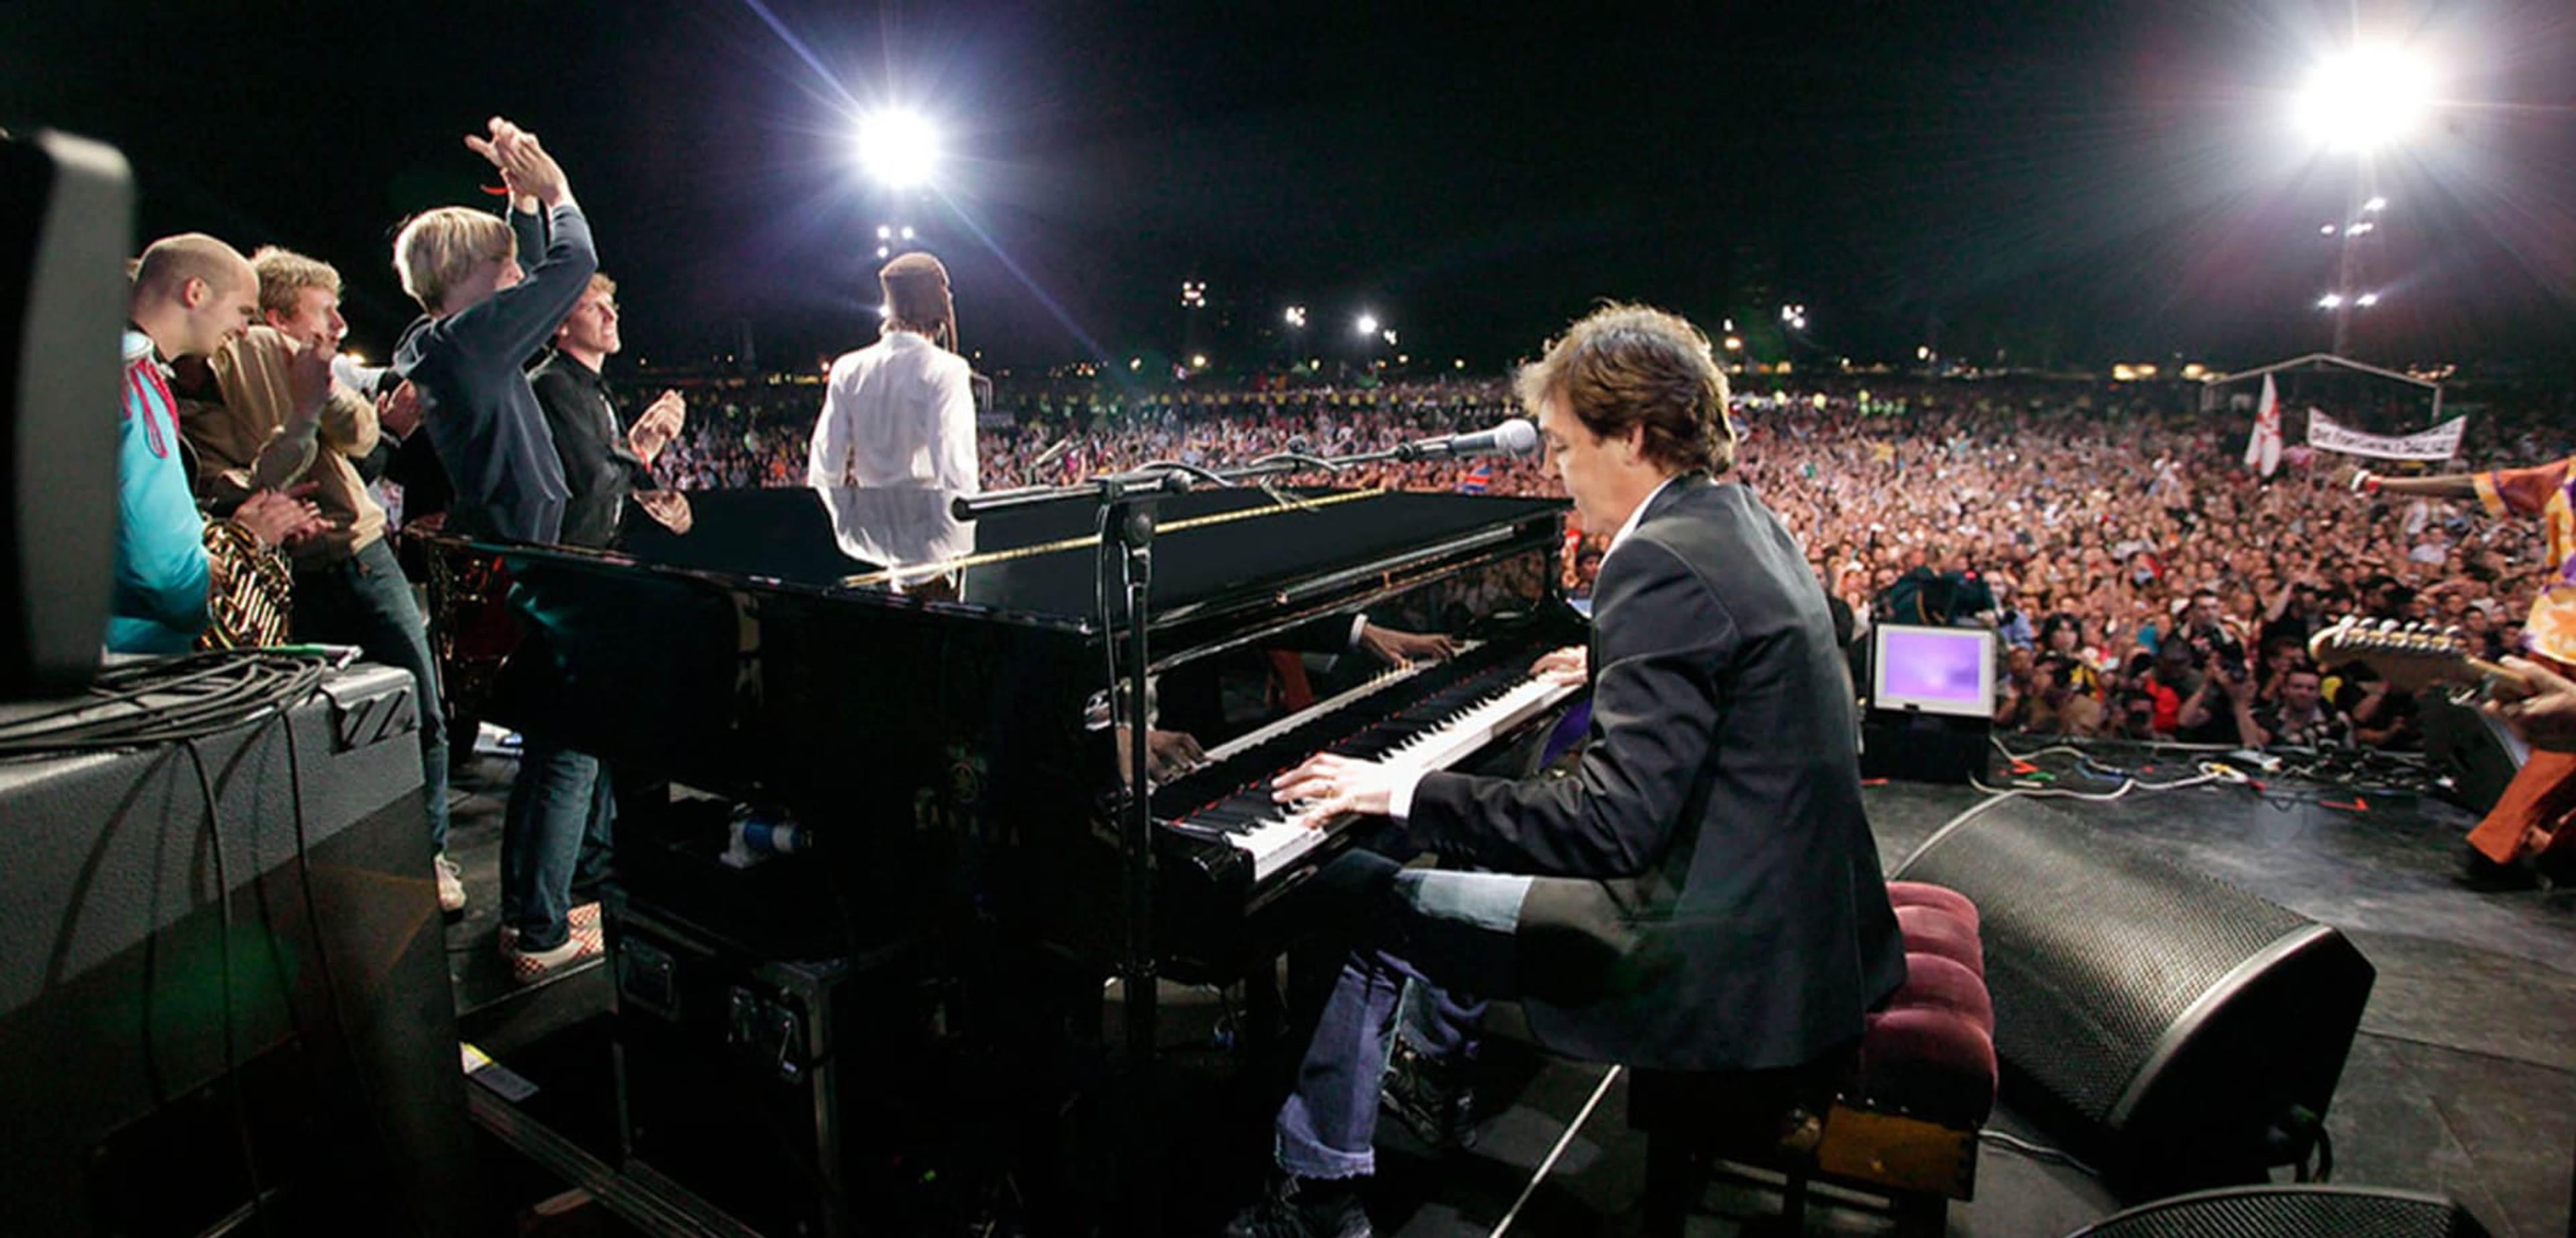 Photo of Paul performing at Live 8, 2005